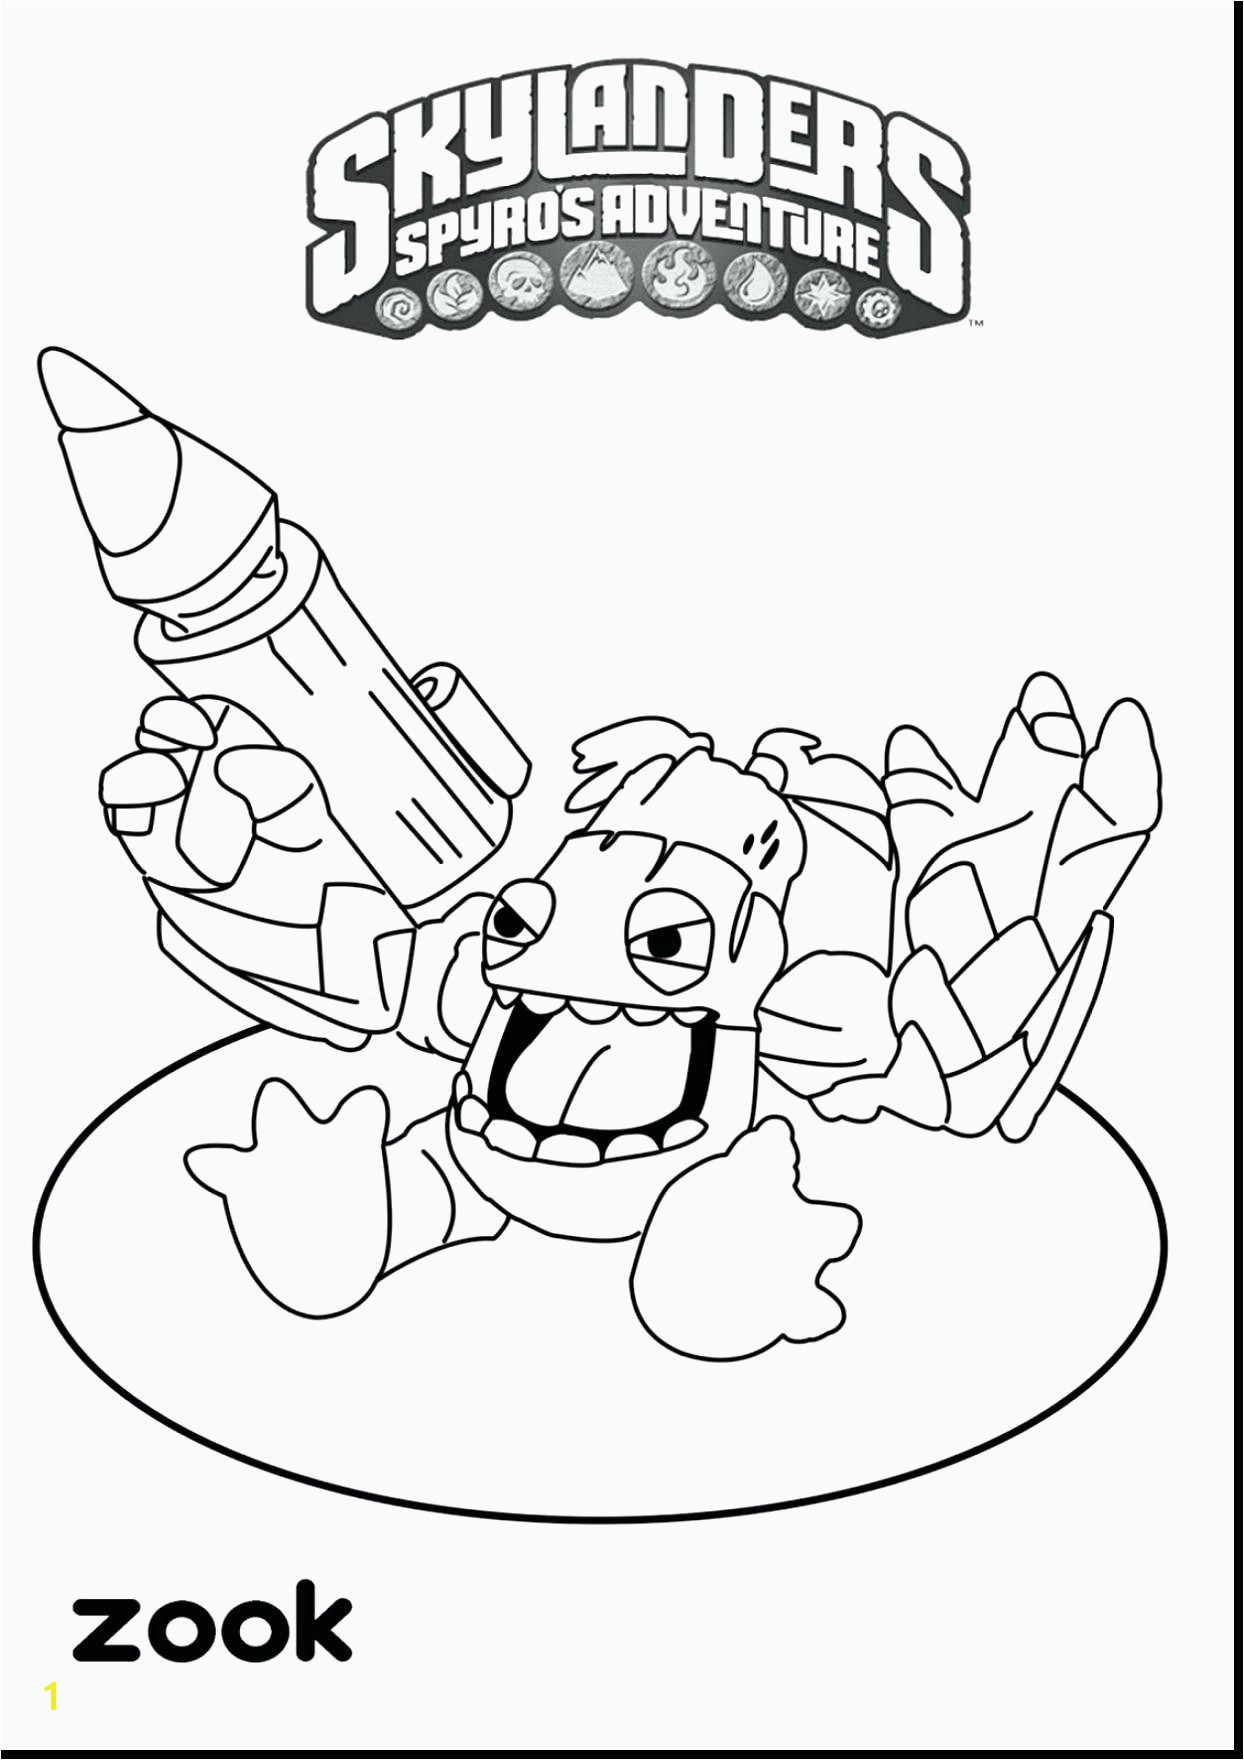 Alyssa Coloring Pages Ben 10 Coloring Pages Upgrade Inspirational Ben 10 Coloring Page